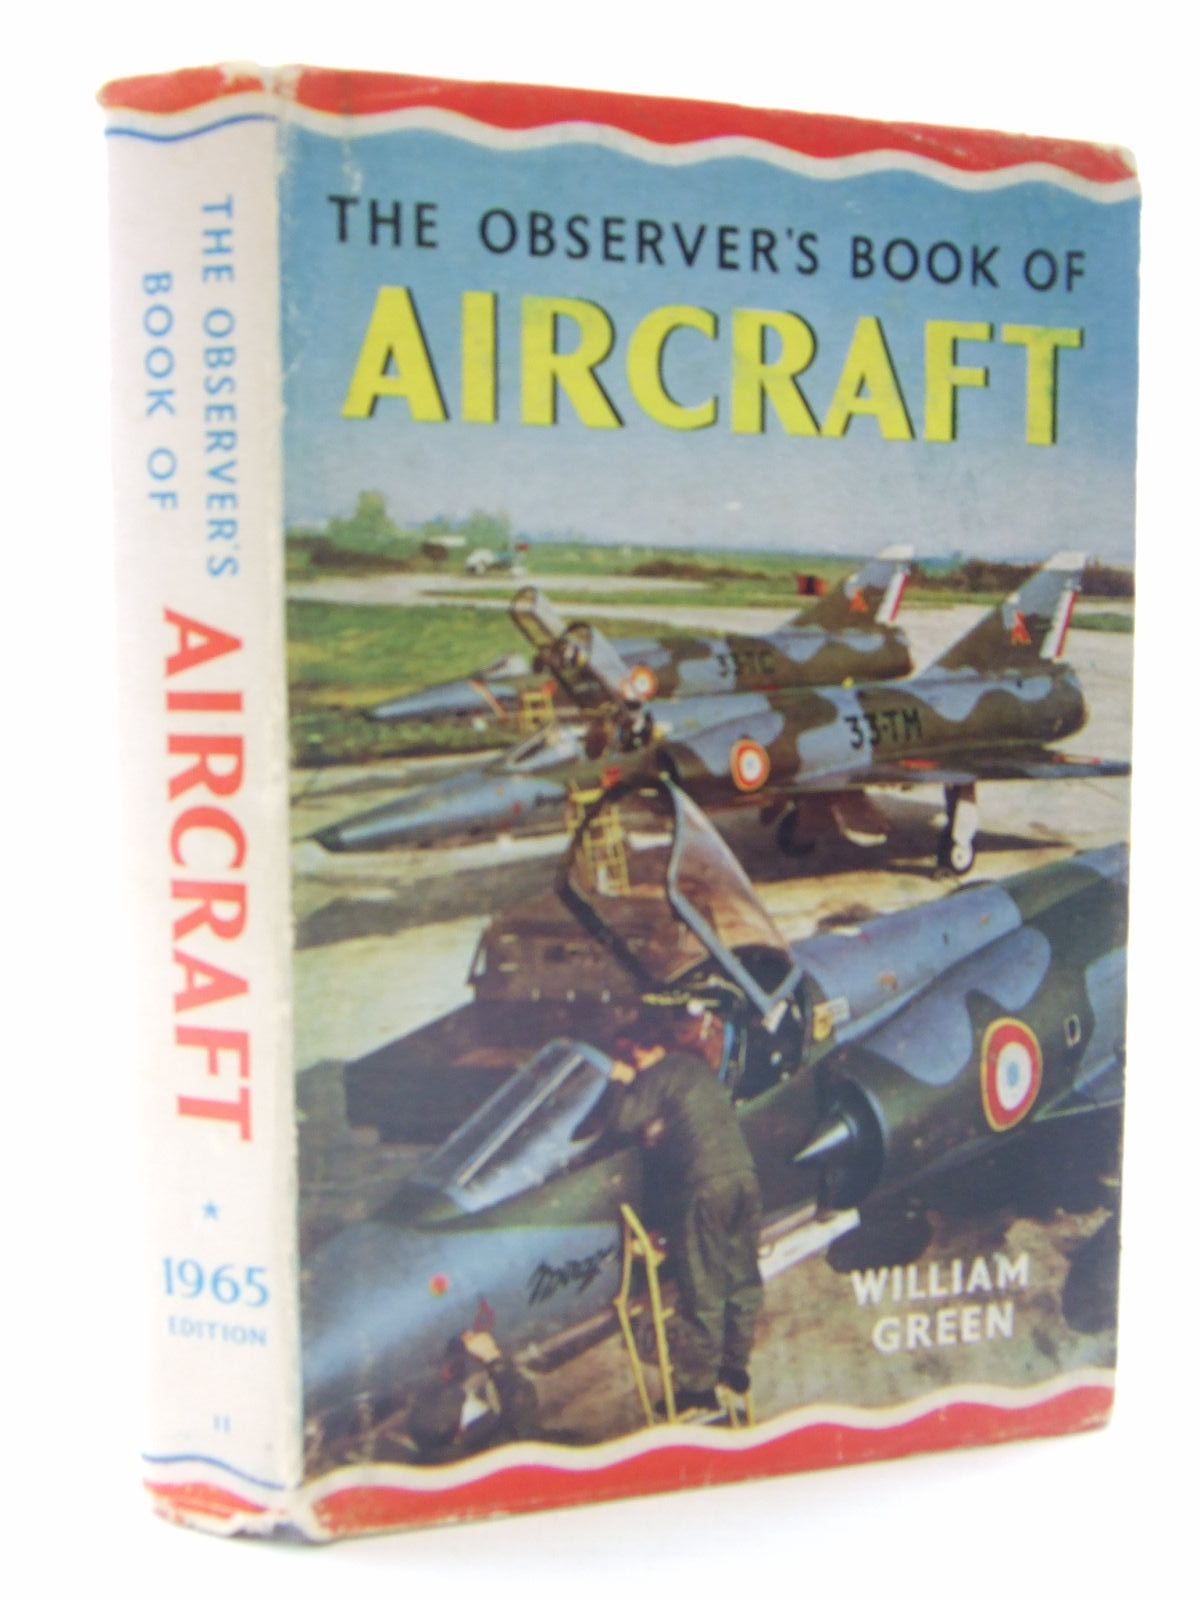 THE OBSERVER'S BOOK OF AIRCRAFT written by Green, William, STOCK CODE ...